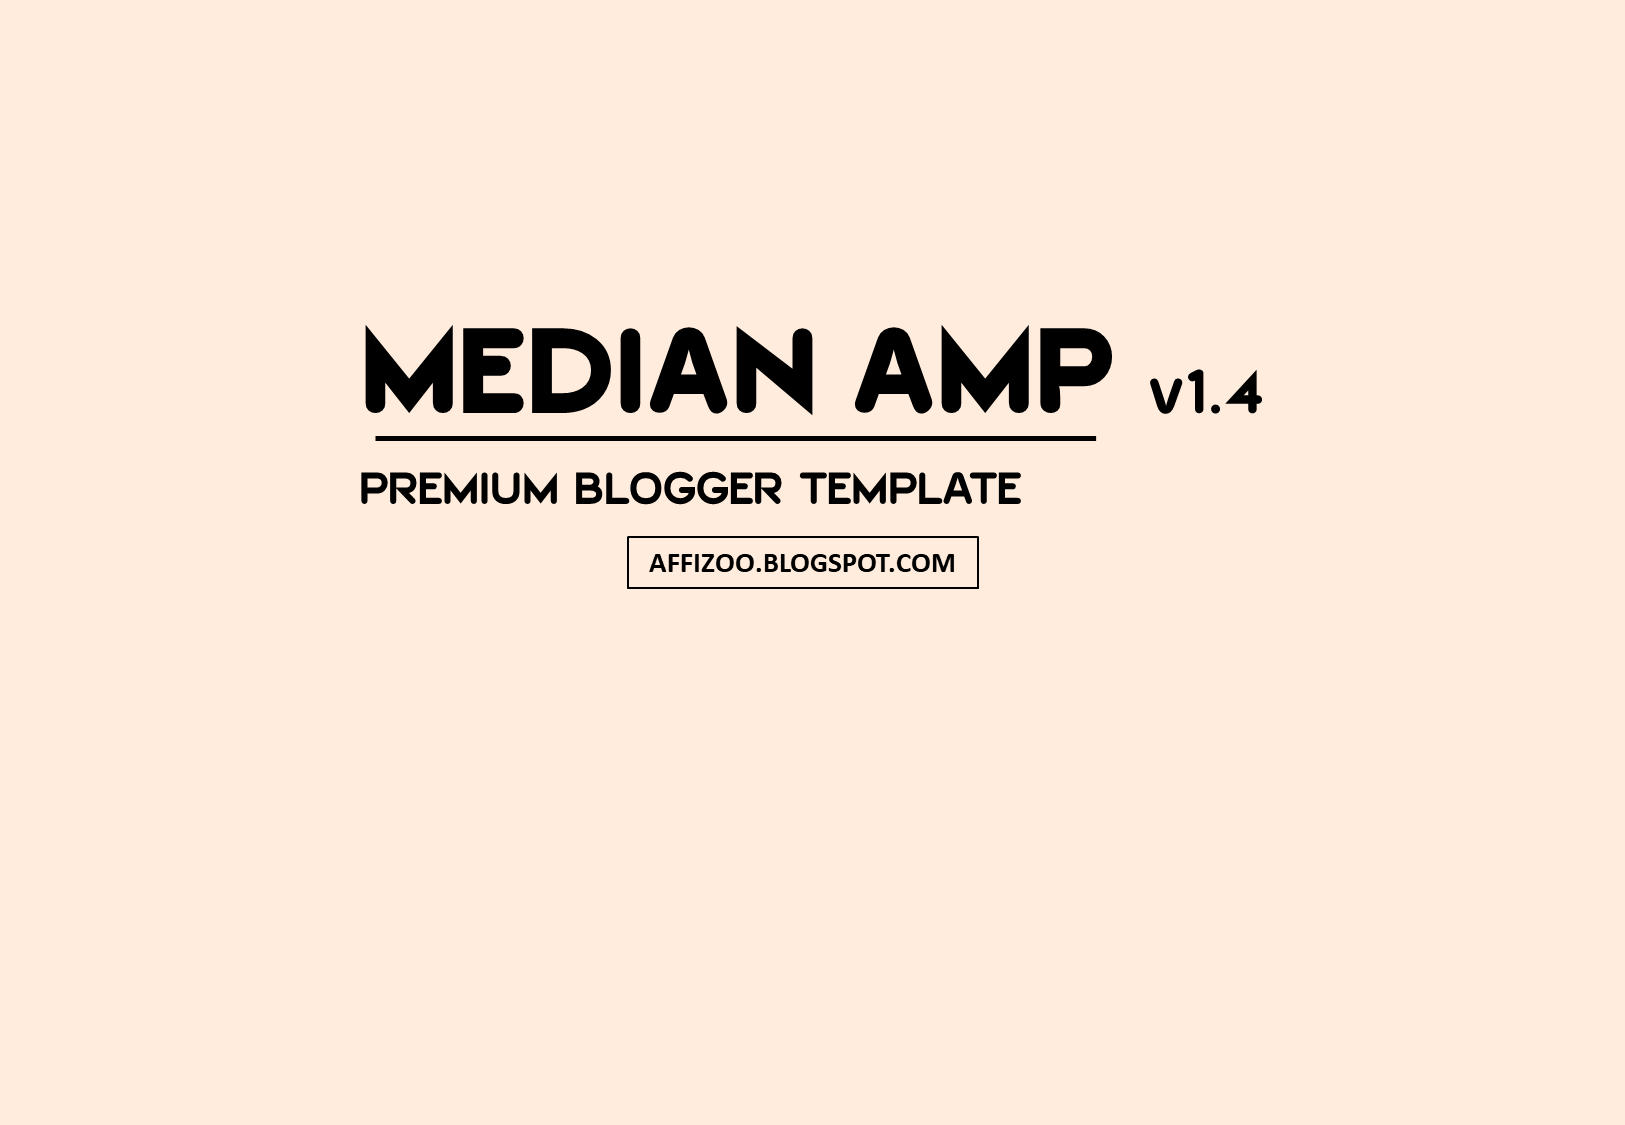 Median UI + AMP Premium Blogger Template [Available] Free Download